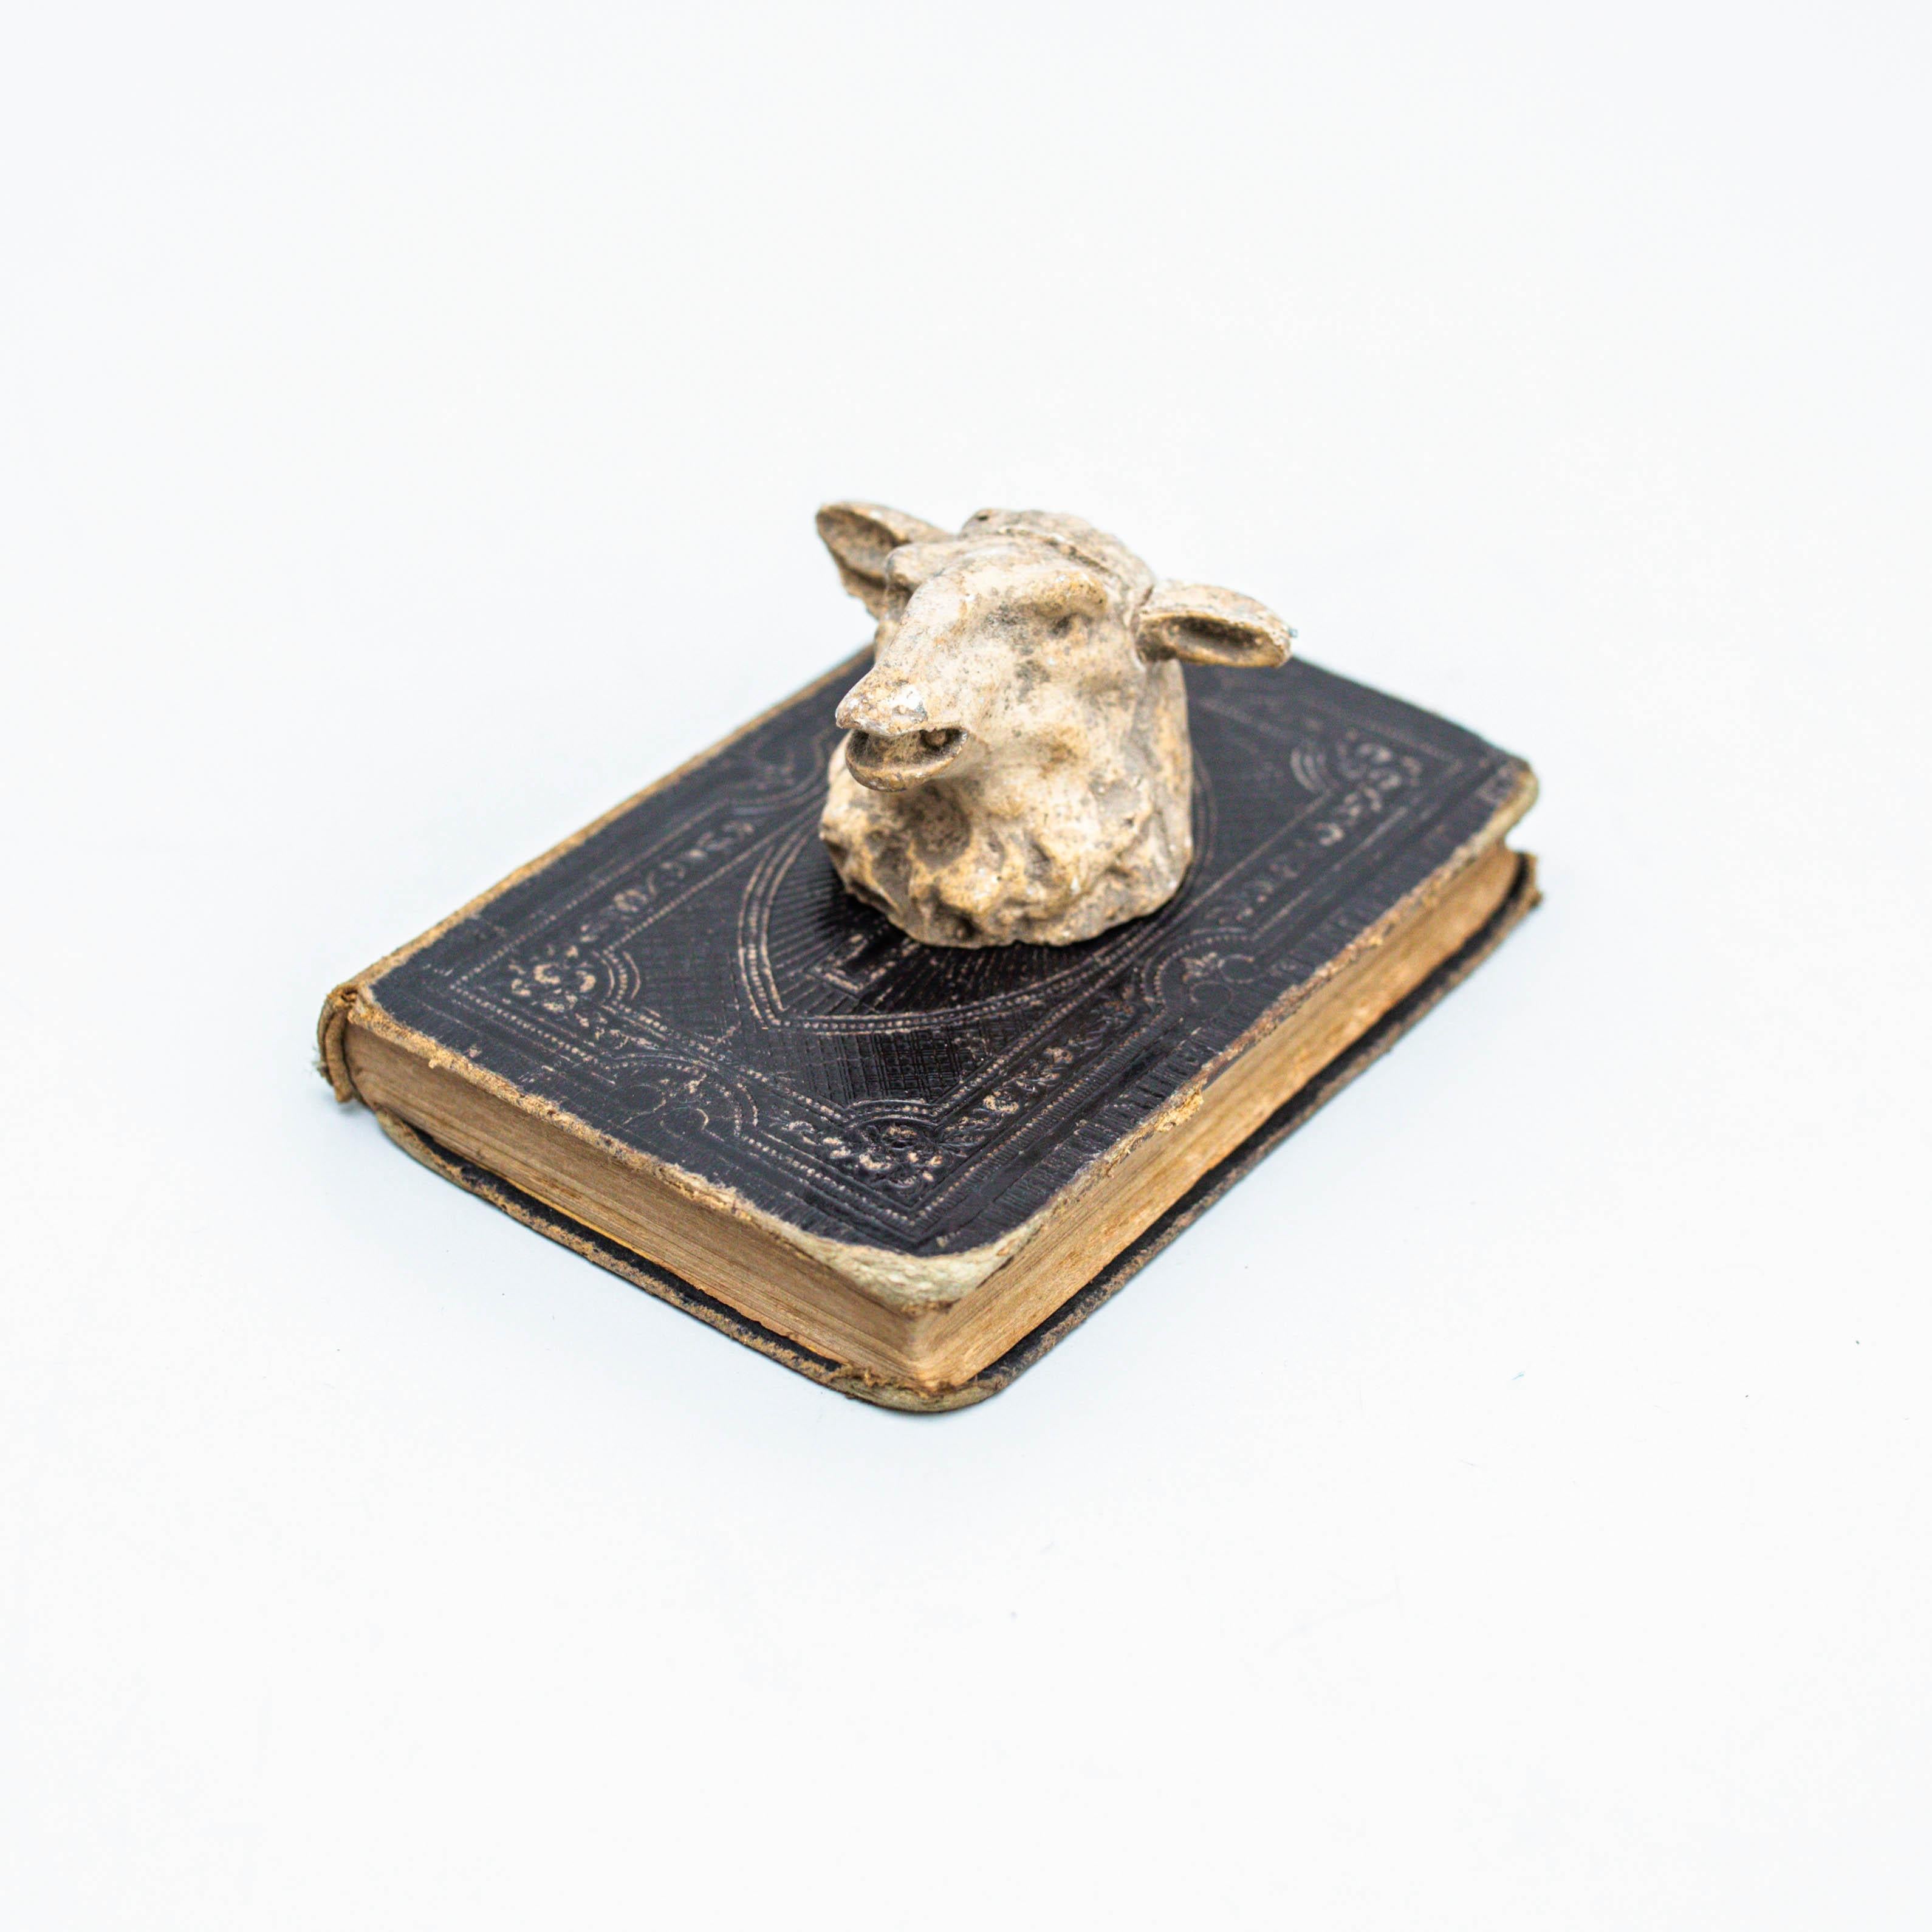 Artwork With Old Book and Mysterious Animal Head Sculpture, Circa 1990  For Sale 5